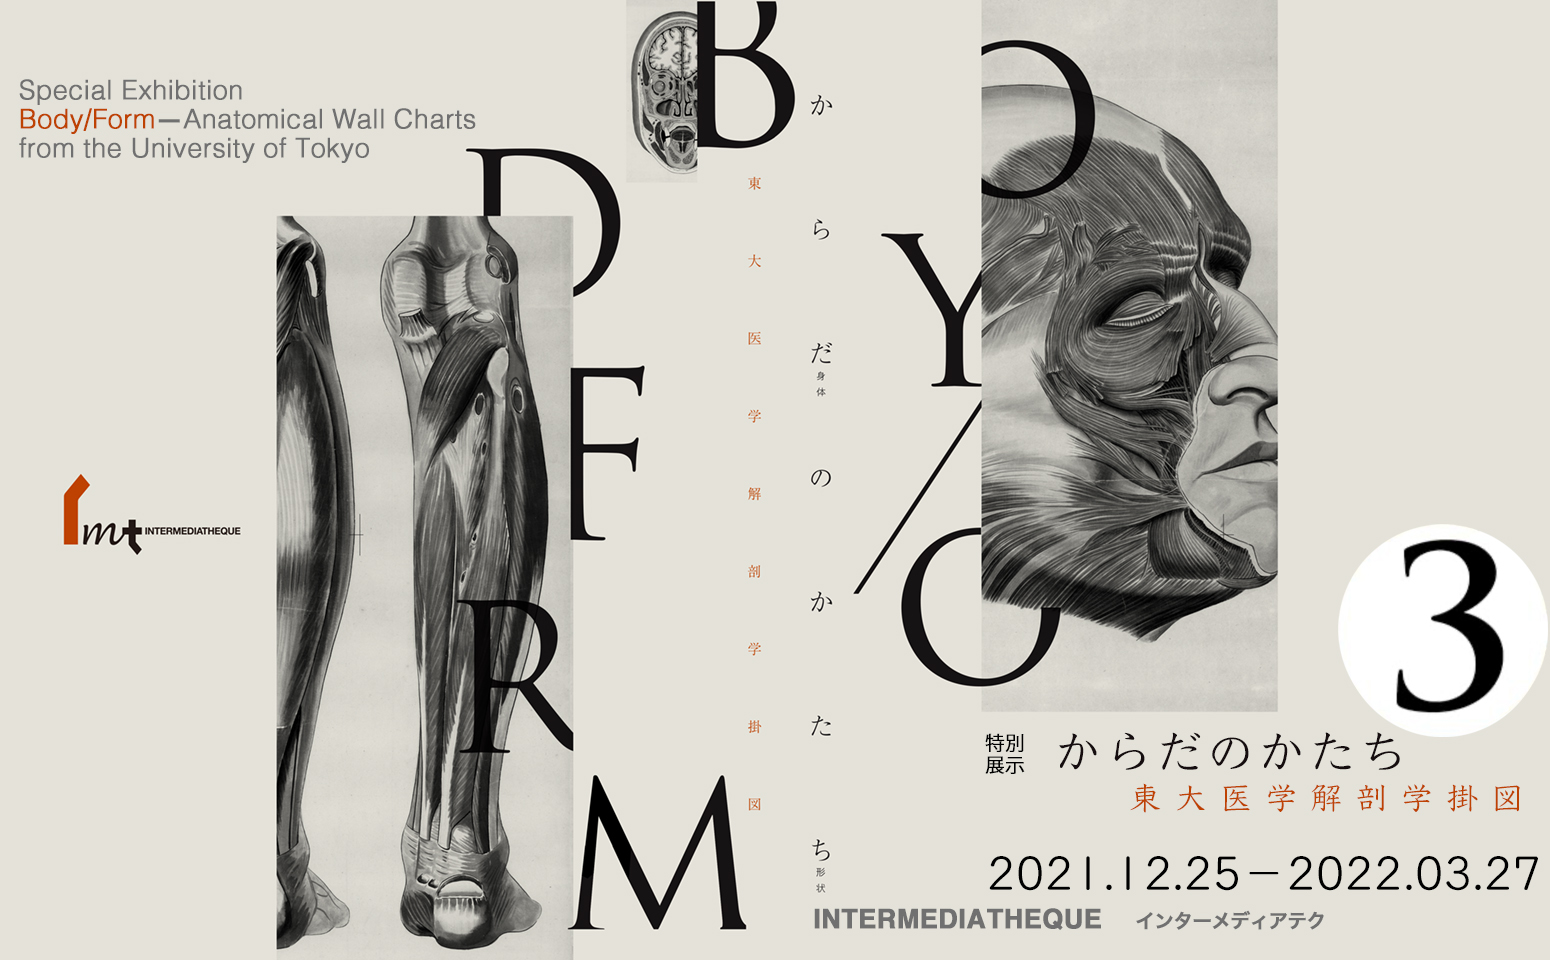 Special Exhibition "Body/Form 3—Anatomical Wall Charts from the University of Tokyo"